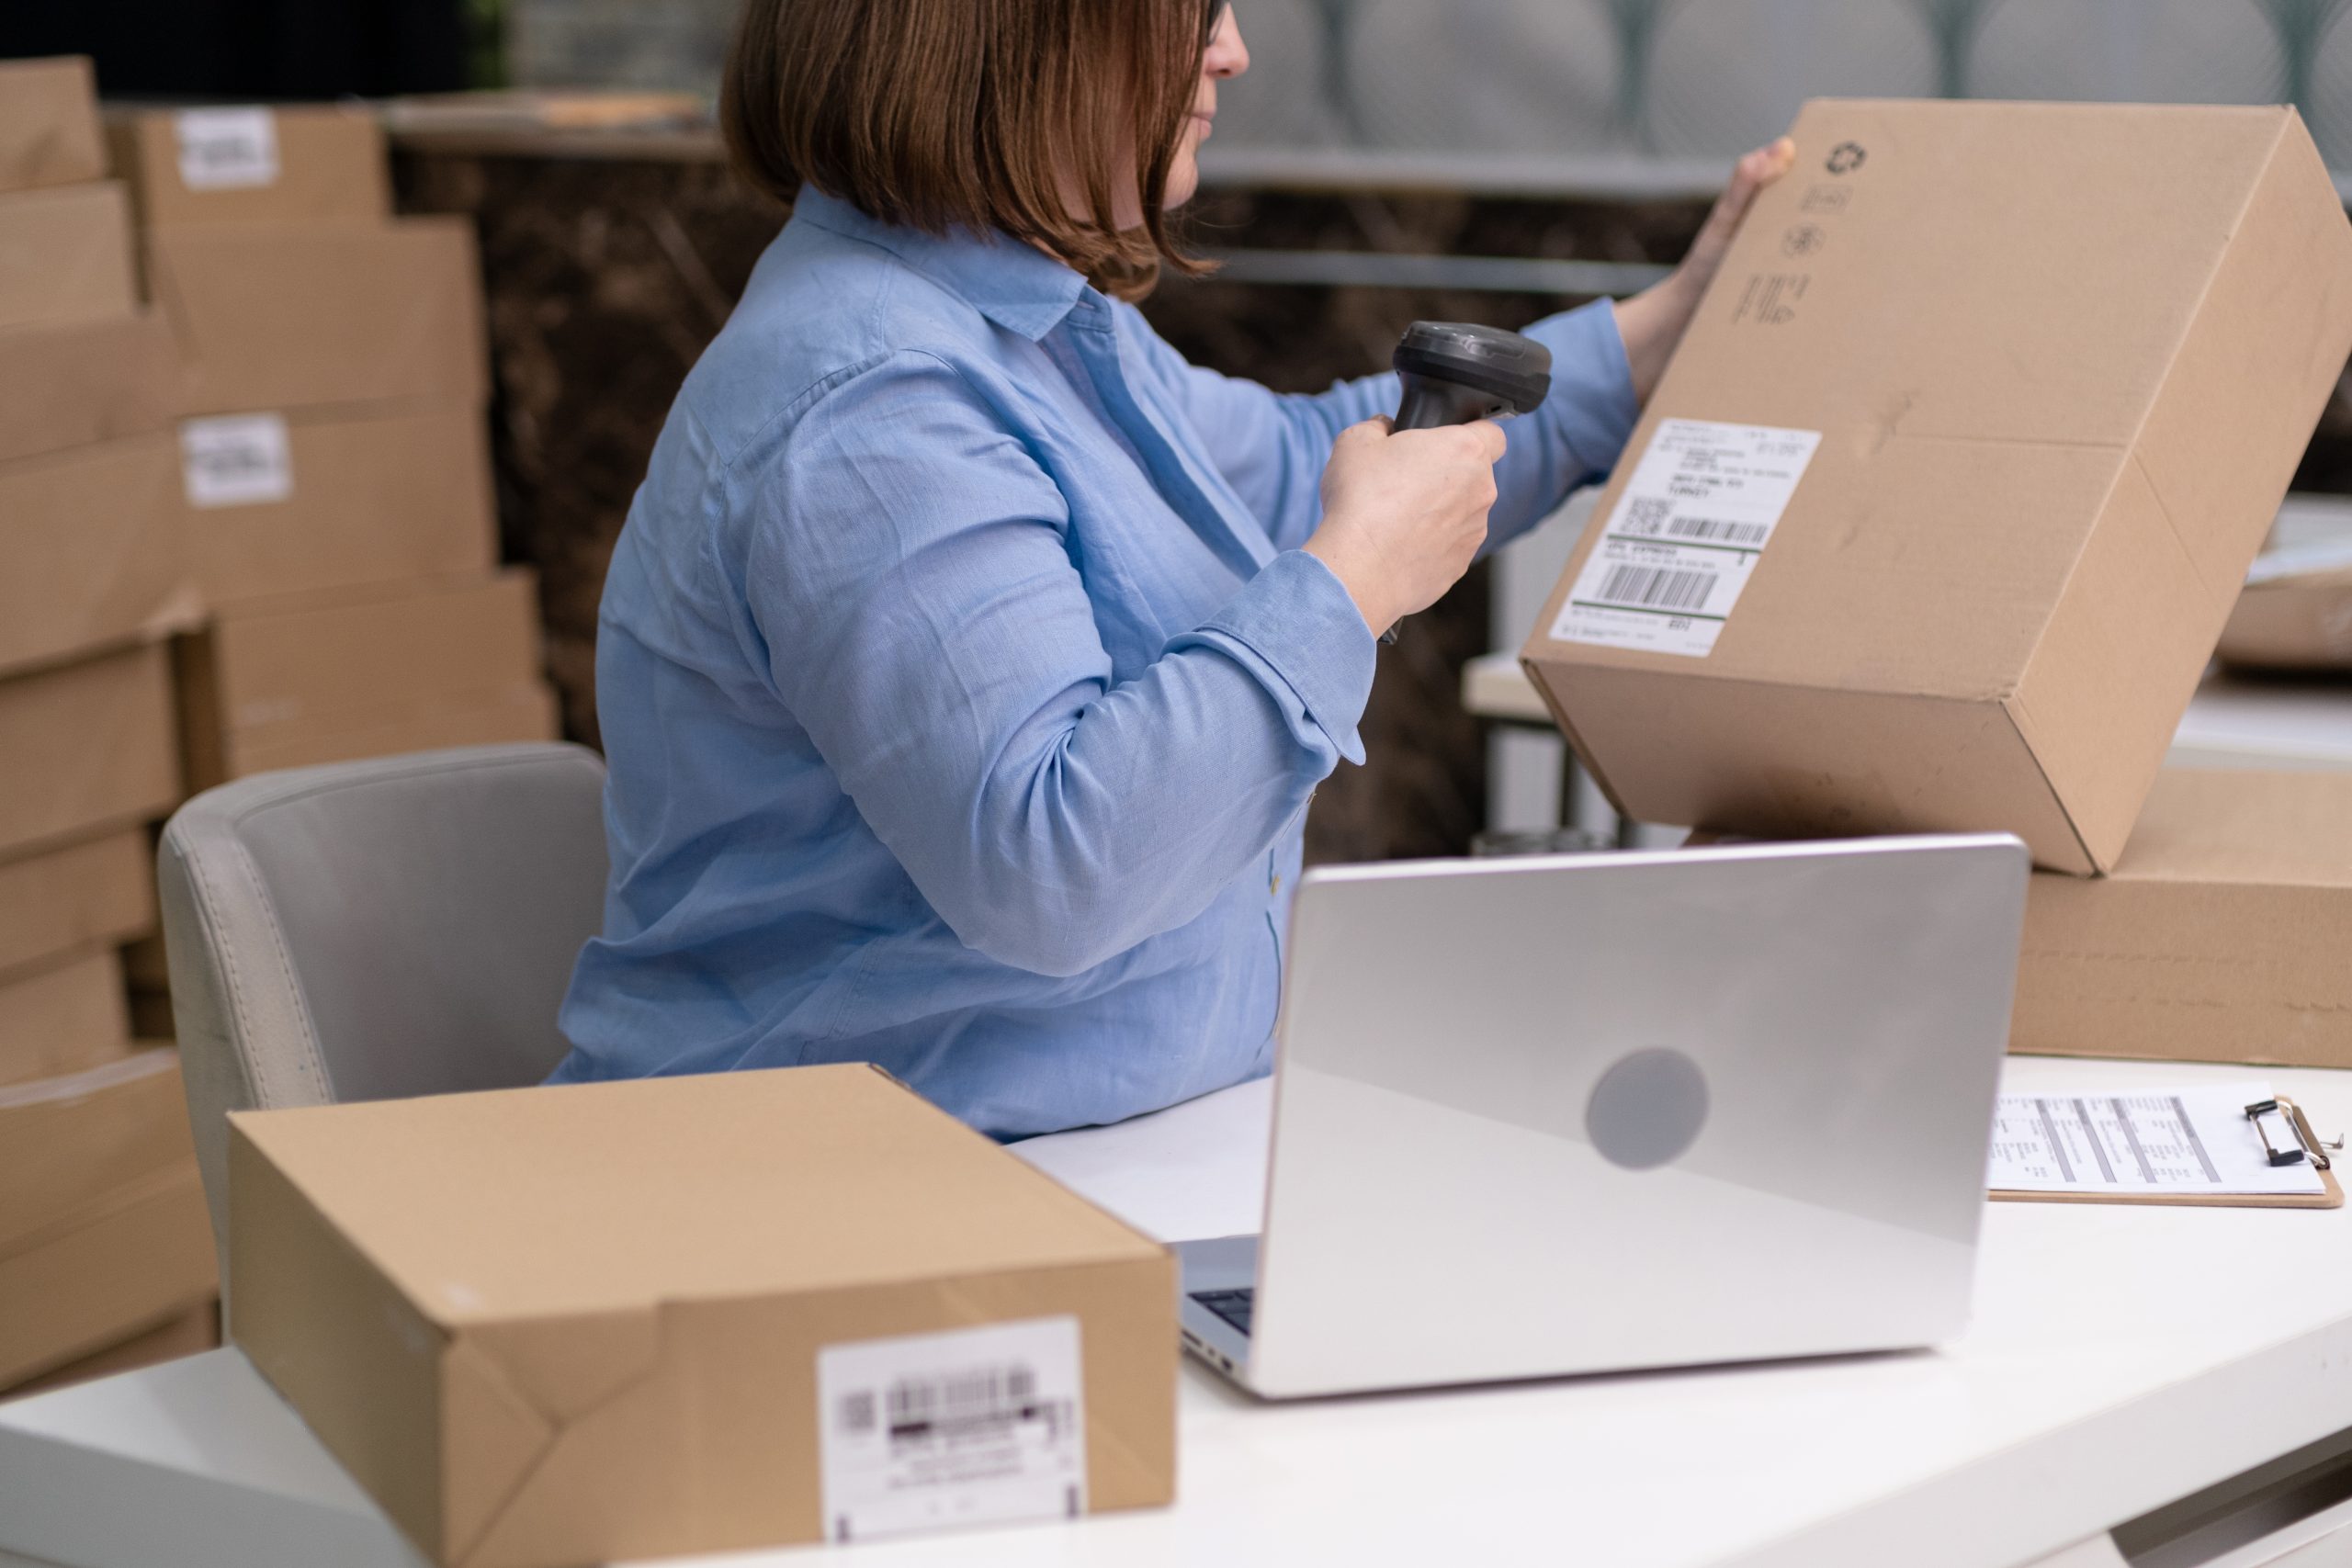 Person in a blue shirt scanning a cardboard box near a laptop and other boxes on a table in a warehouse-like shipping setting.